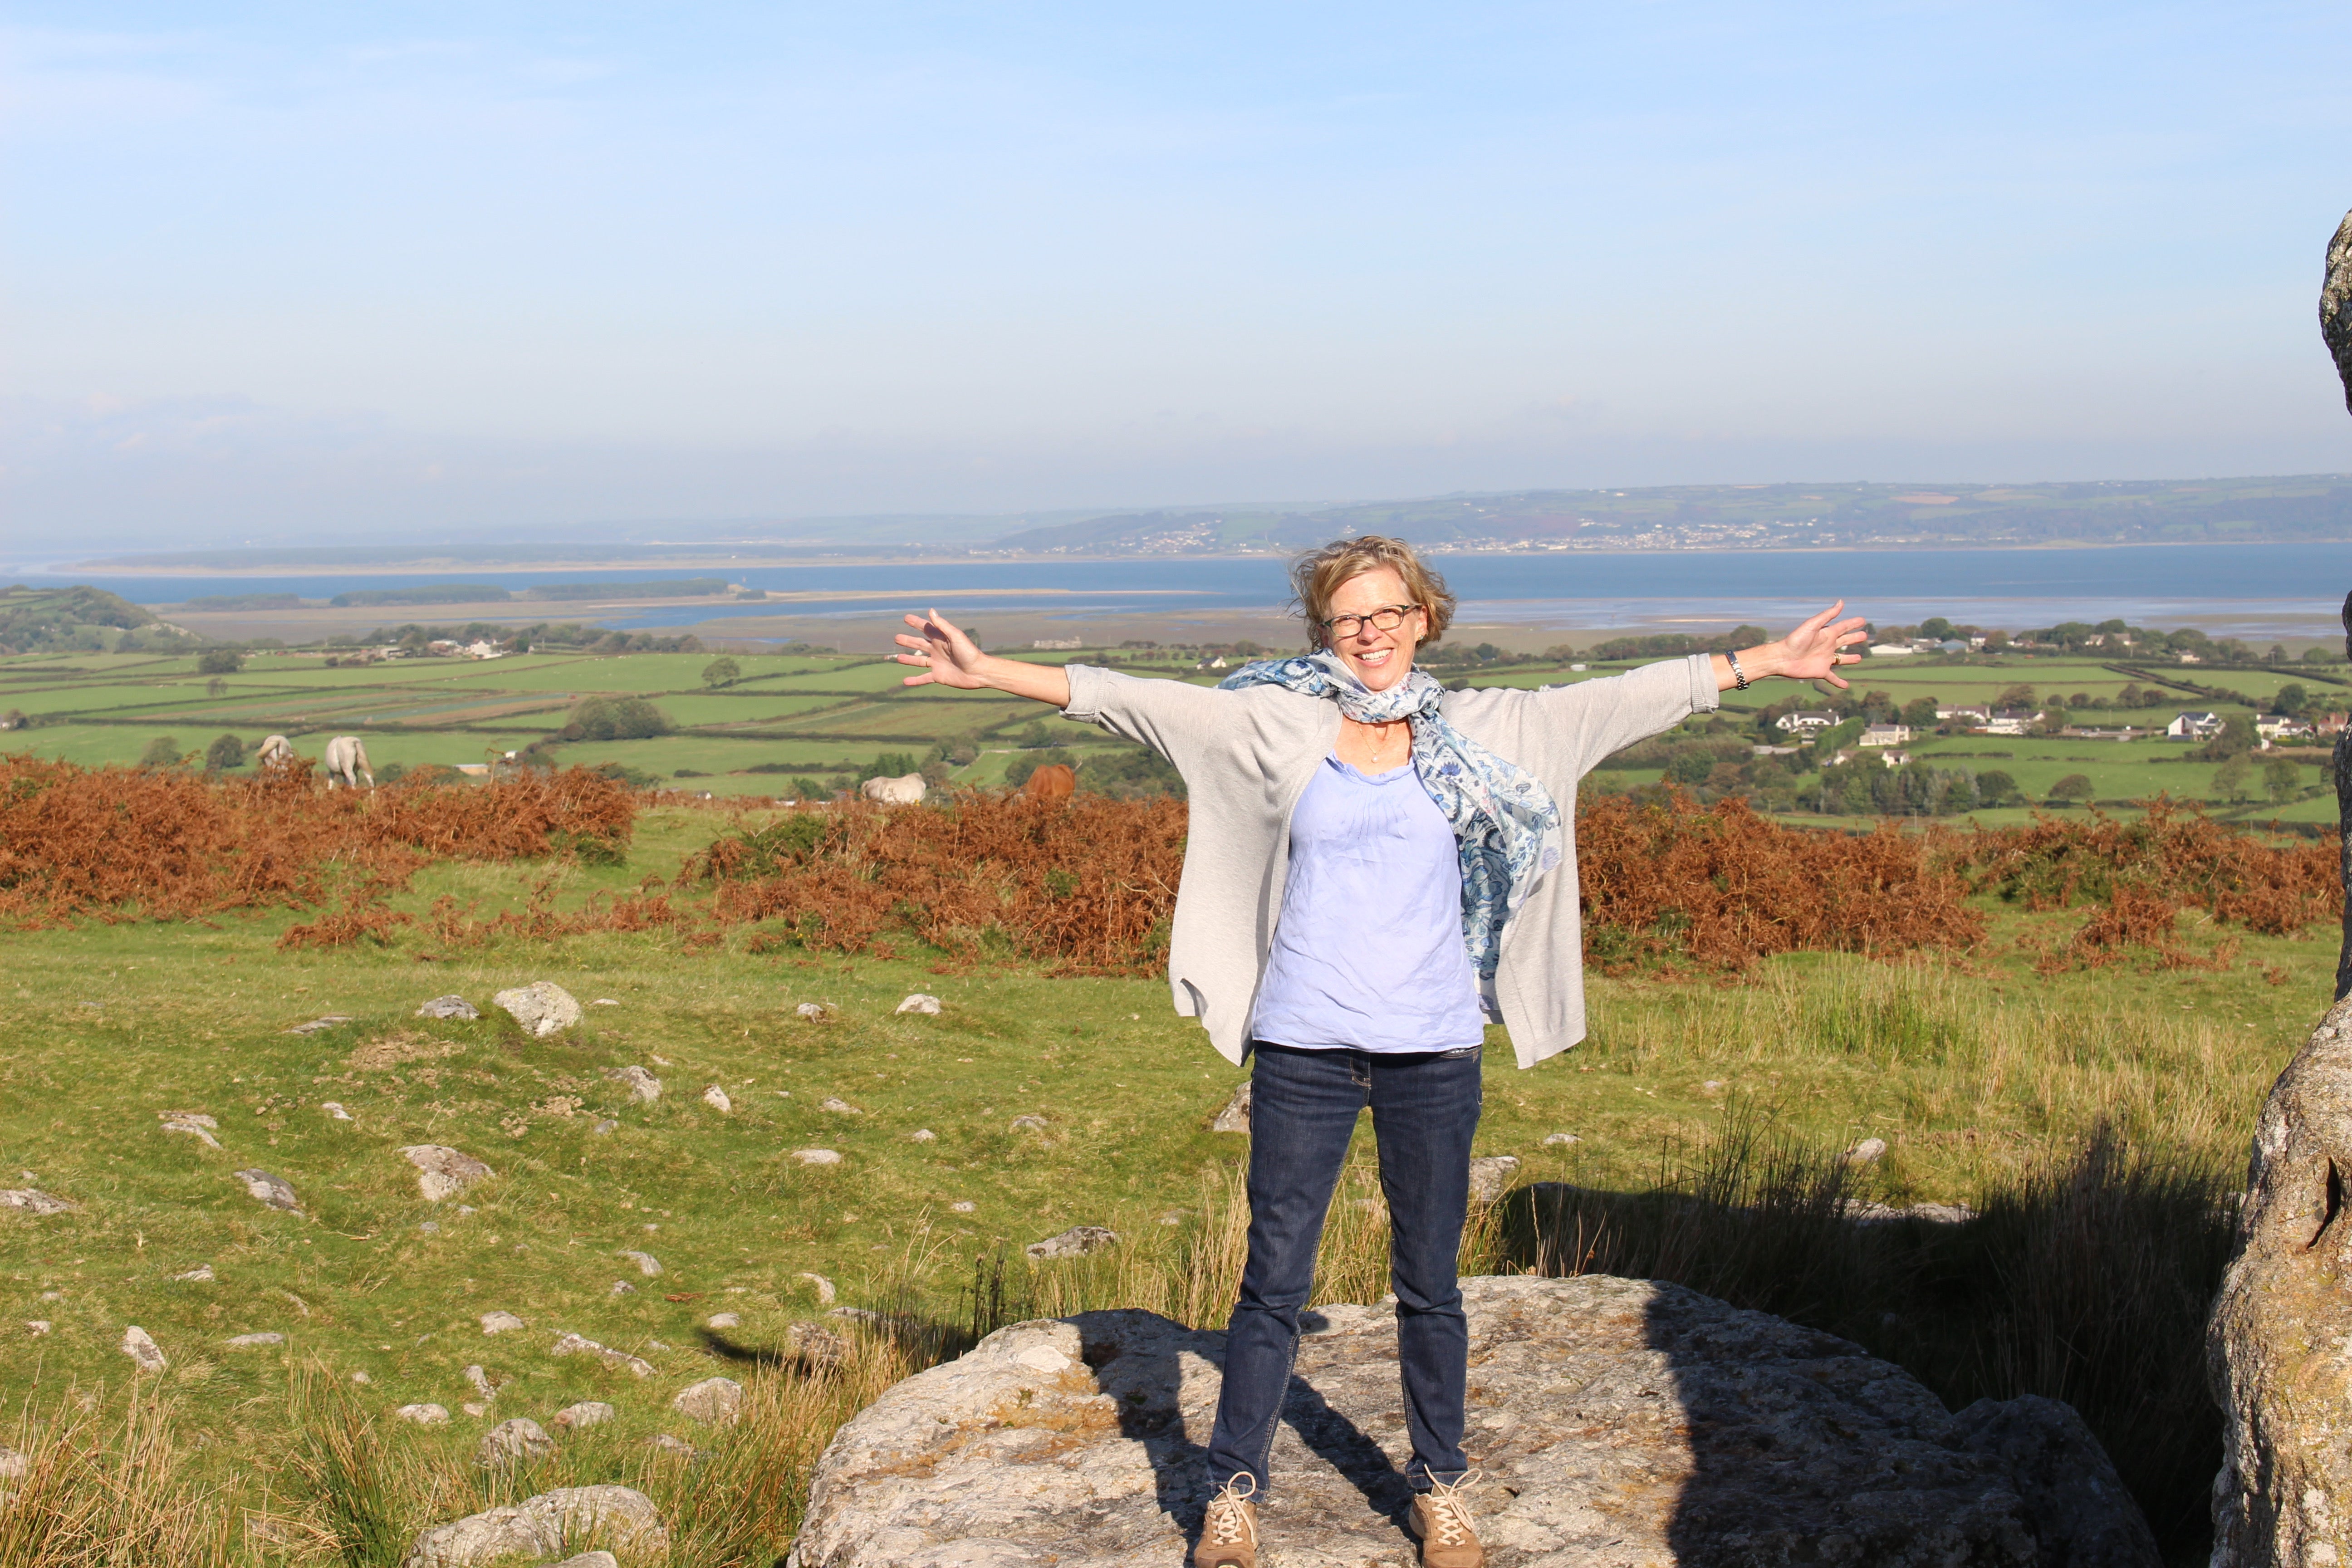 Woman stood on rock in open plain with countryside around her